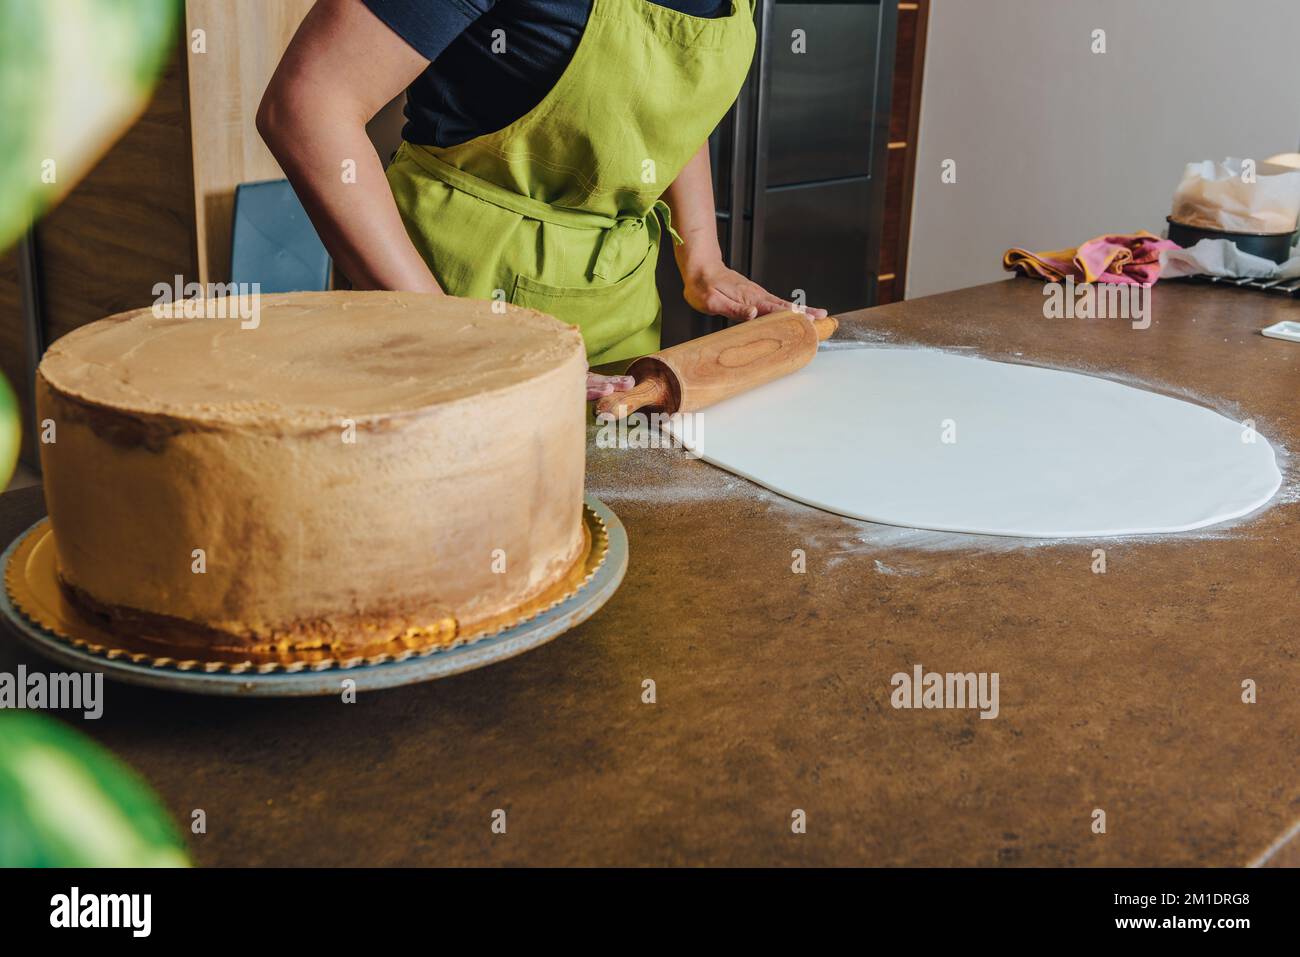 Woman using rolling pin preparing pink fondant for cake decorating, hands detail. DIY, sequence, step by step, part of series. Stock Photo